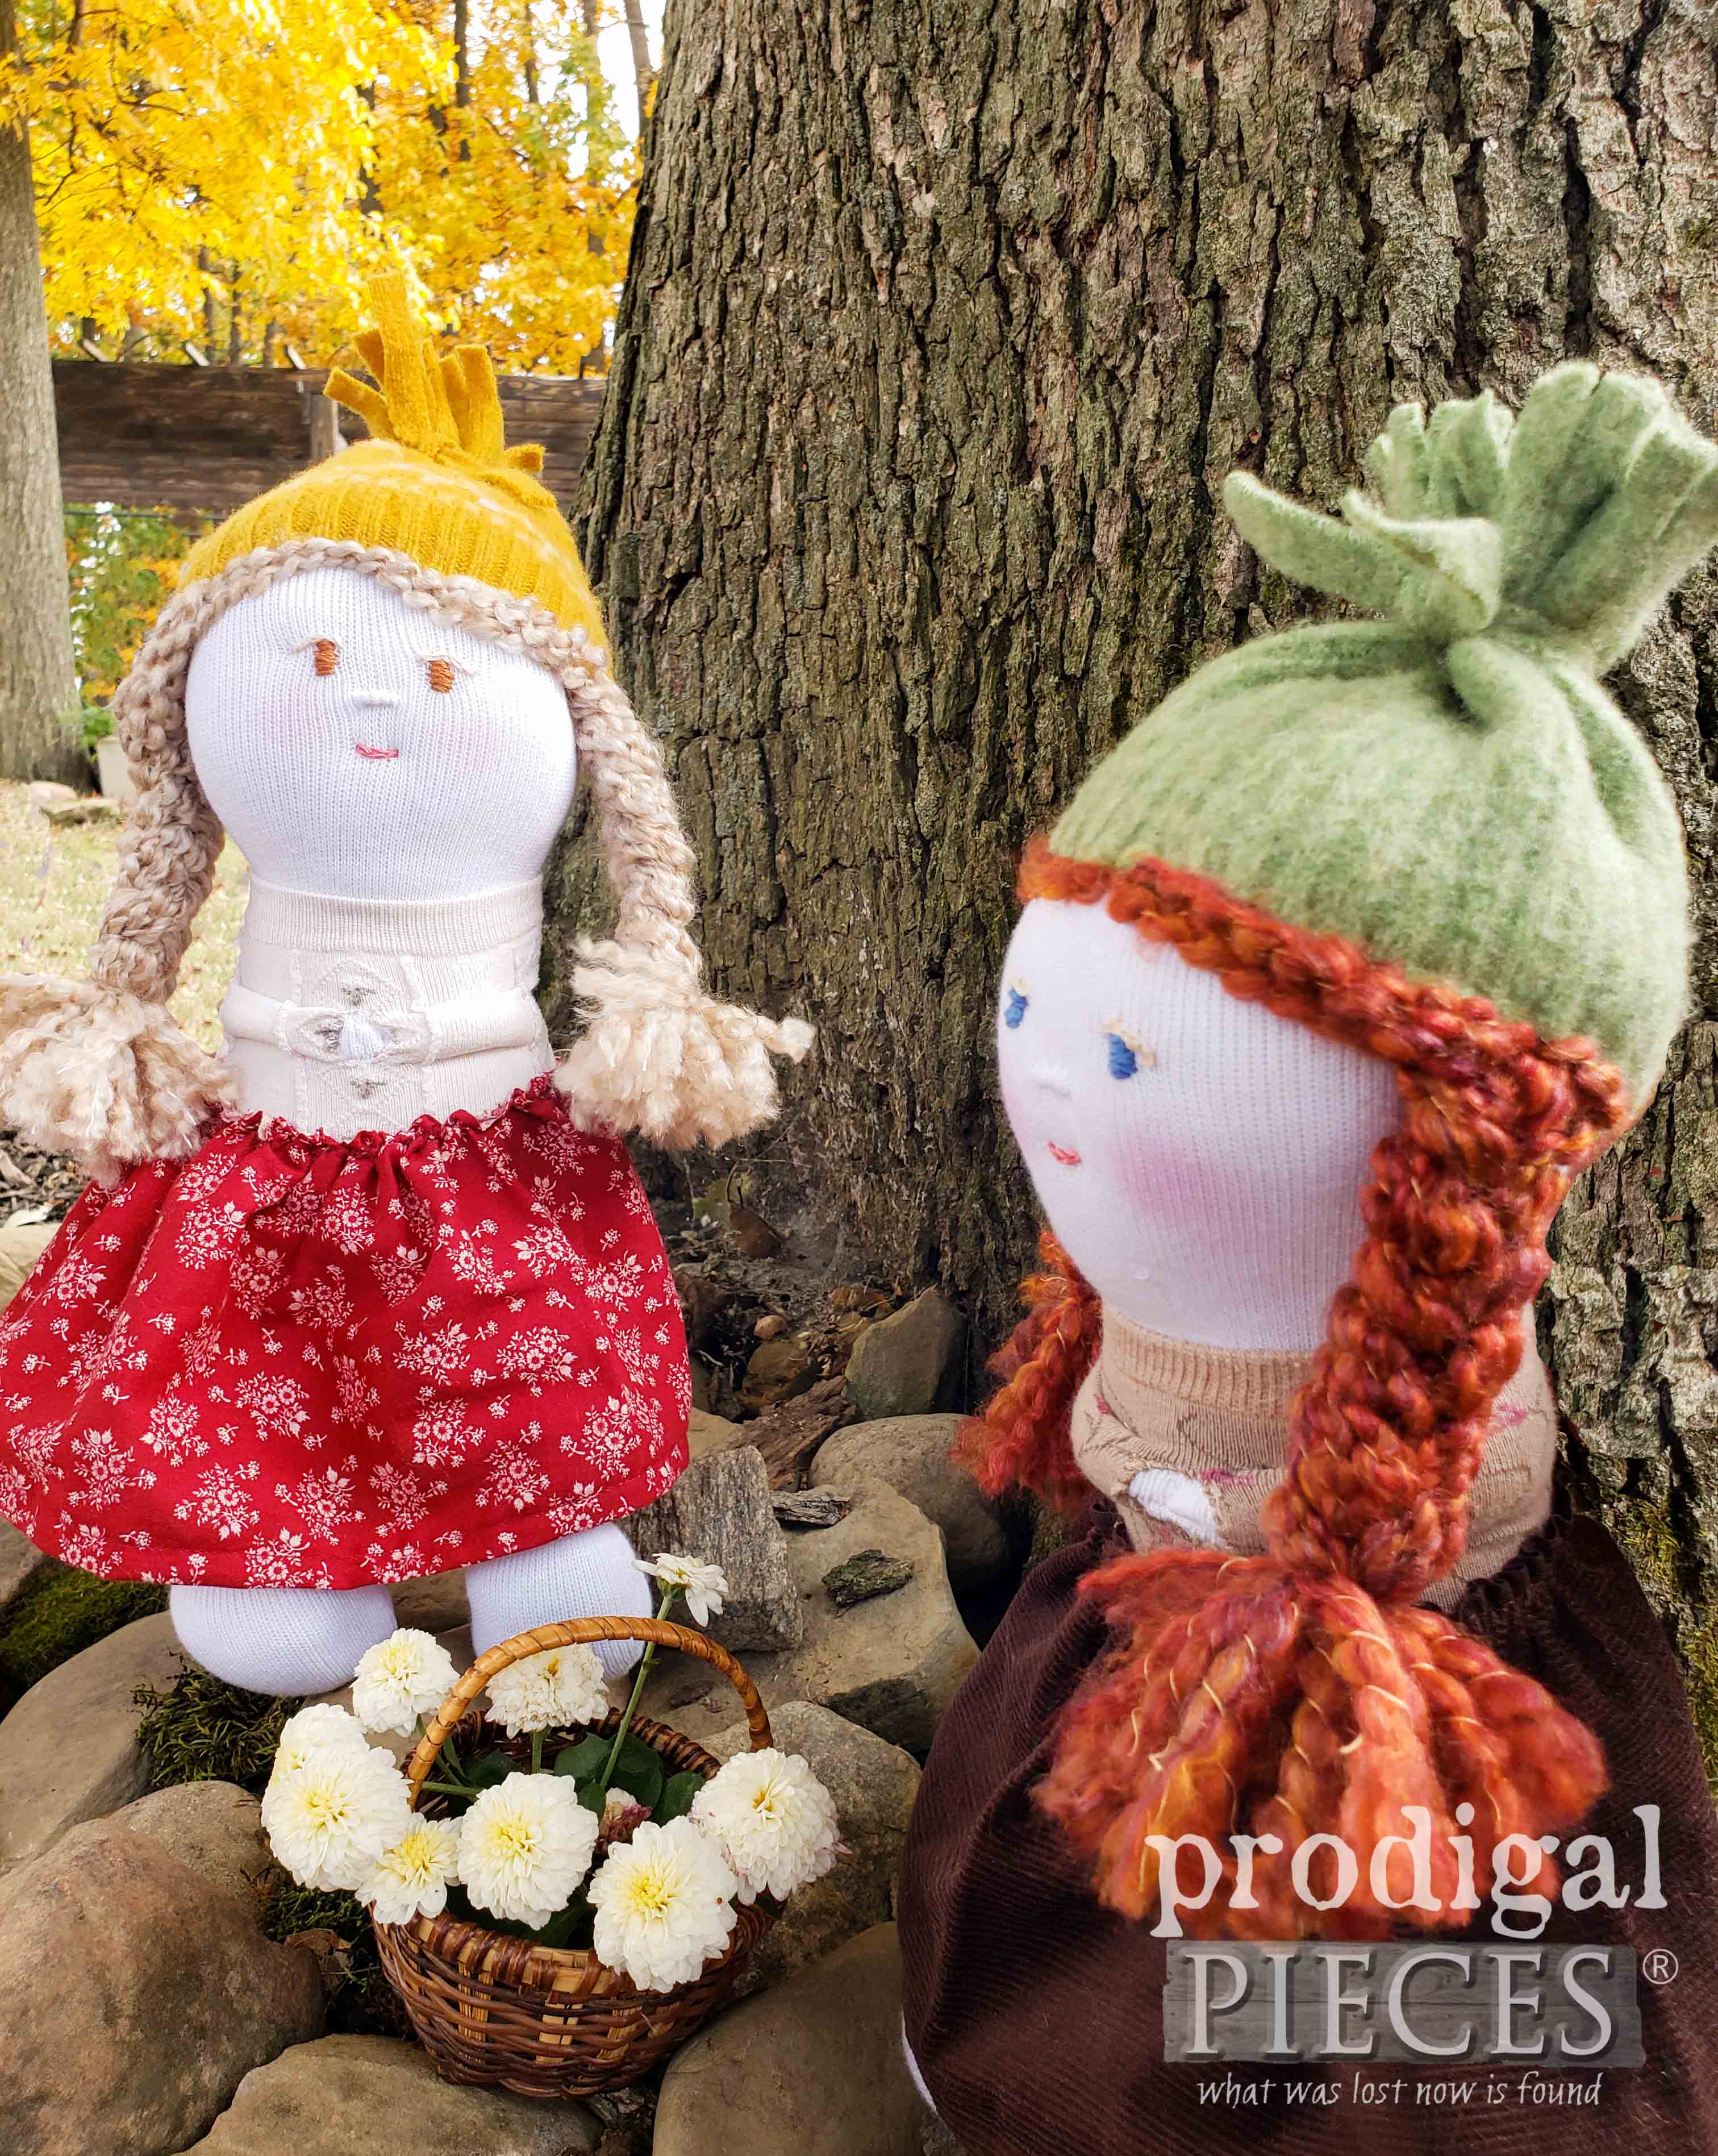 Super Soft Handmade Sock Dolls with Upcycled Materials by Larissa of Prodigal Pieces | prodigalpieces.com #prodigalpieces #handmade #diy #toys #dolls #crafts #sewing